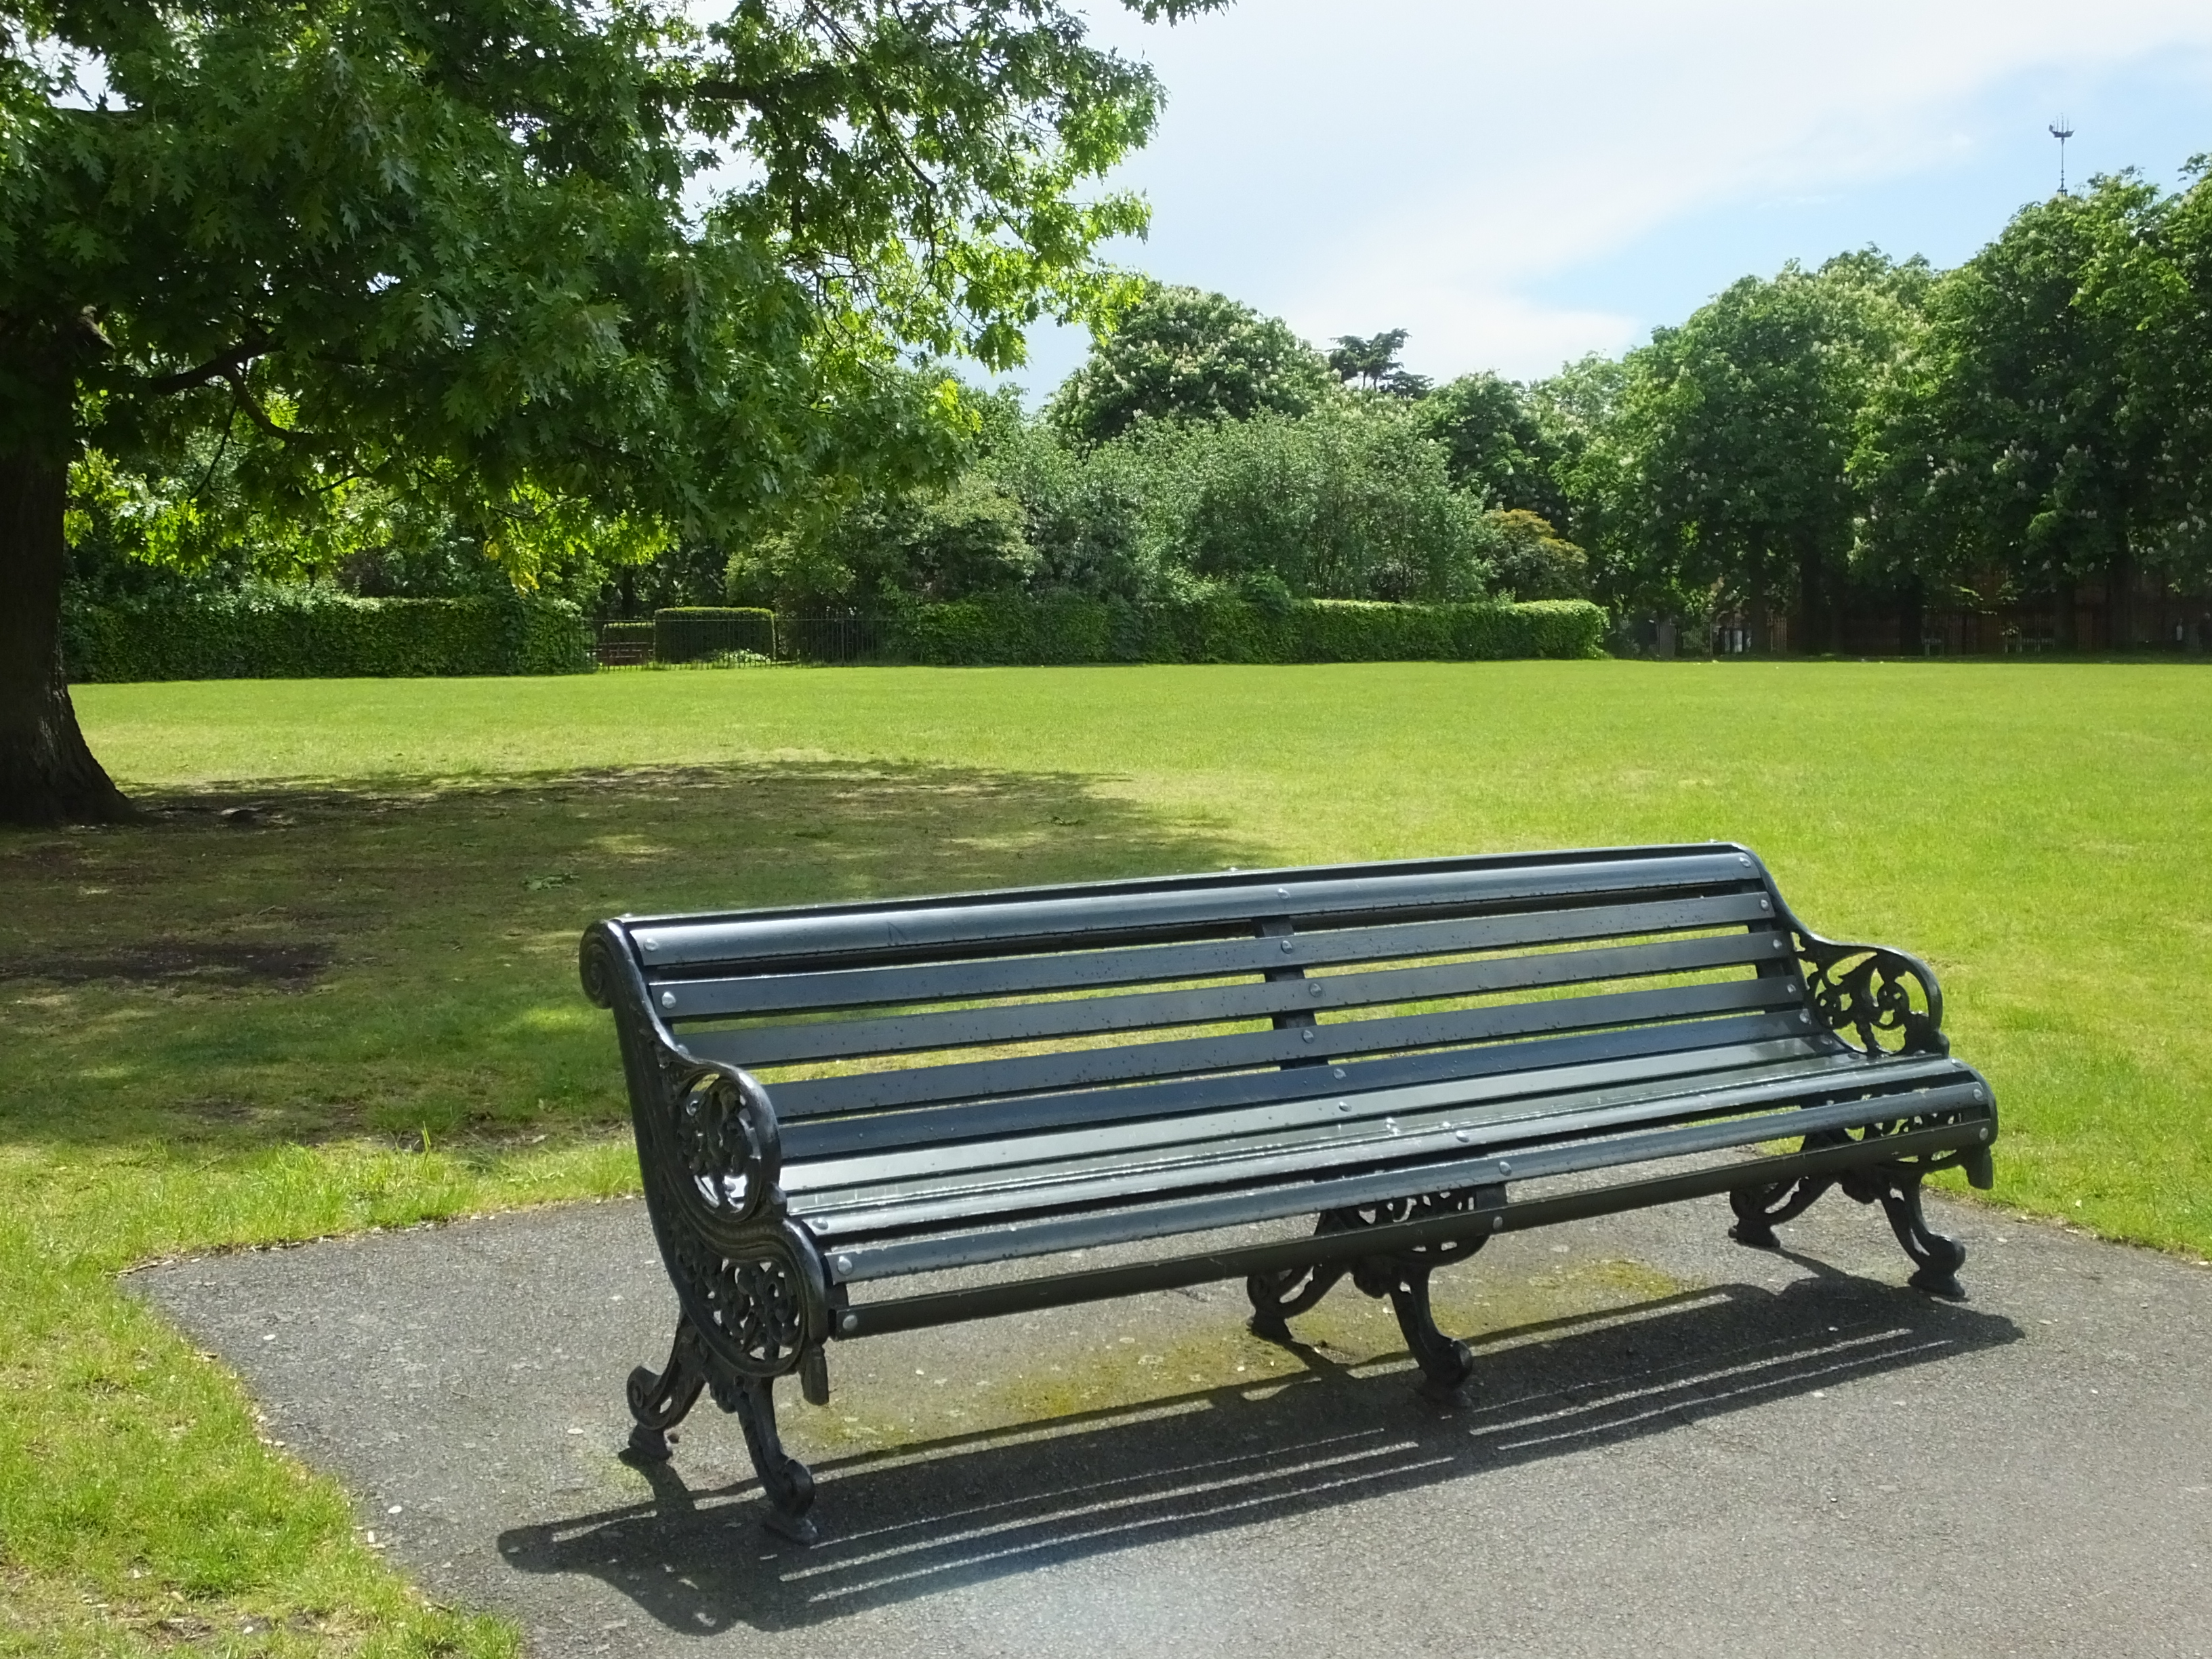 File:Park bench in Greenwich Park 6396.JPG - Wikimedia Commons